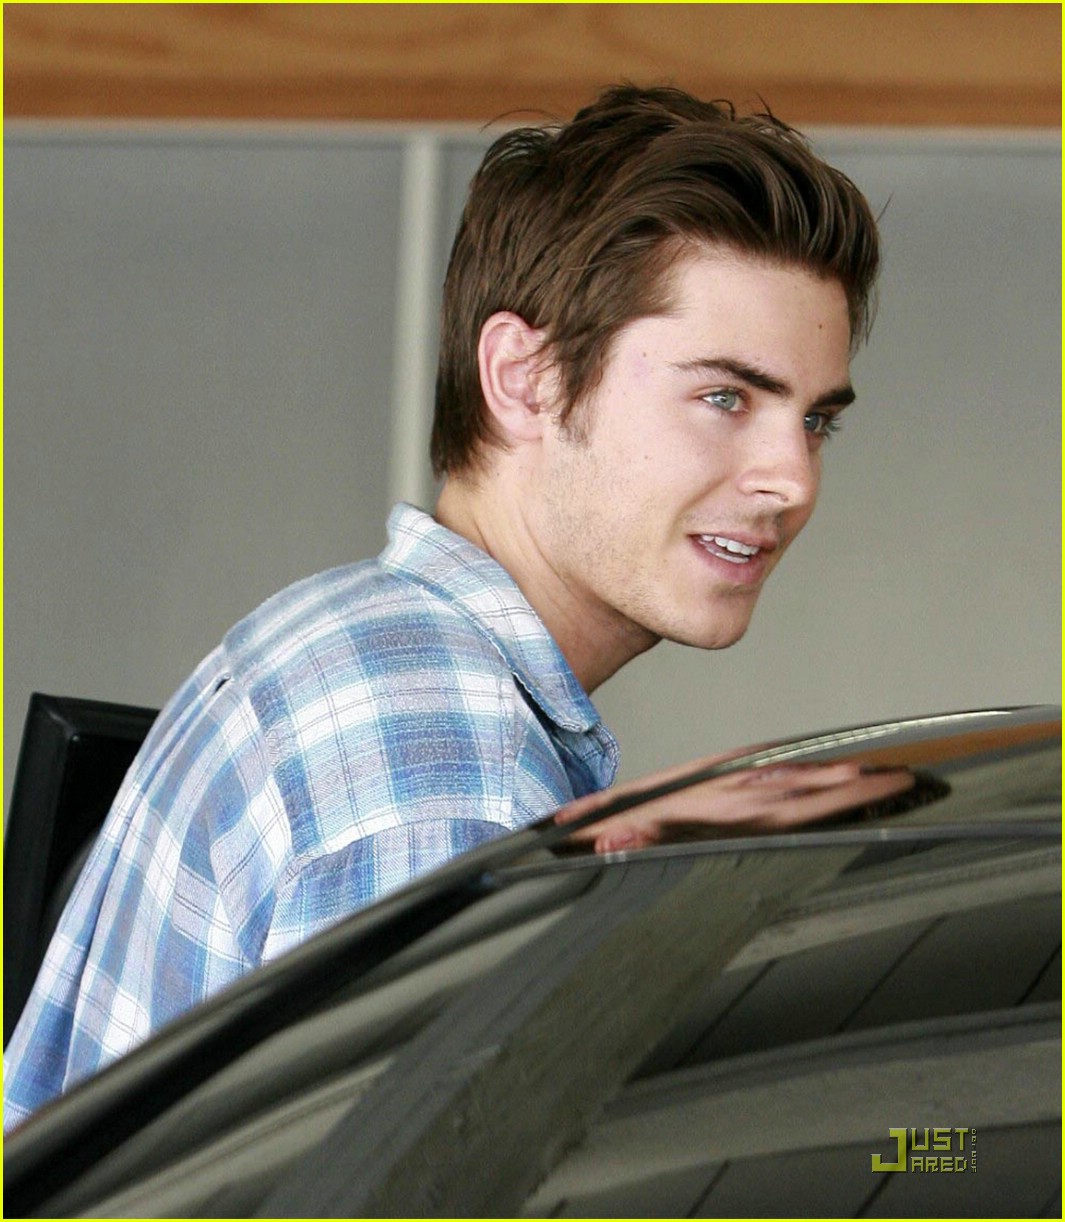 Zac Efron Hairstyles Are Becoming Popular Ltlt MENS HAIRSTYLES 2012